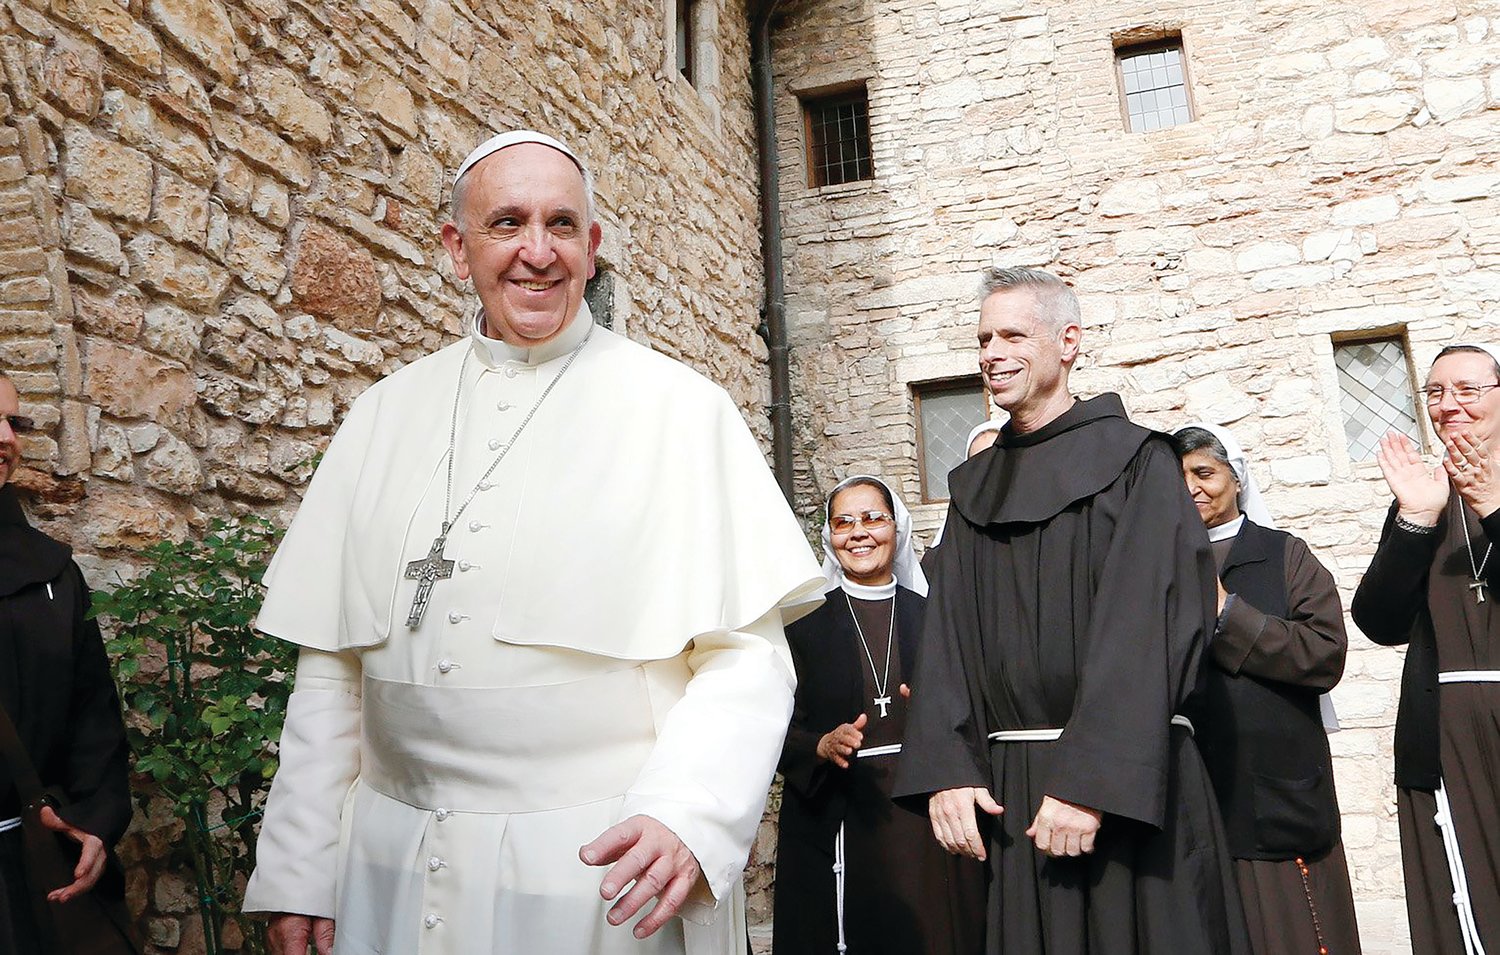 Pope Francis greets religious as he leaves the hermitage and cell of St. Francis in Assisi, Italy, in this Oct. 4, 2013, file photo. The pope plans to visit Assisi on Oct. 3 to celebrate a private Mass and sign his new encyclical on human fraternity.